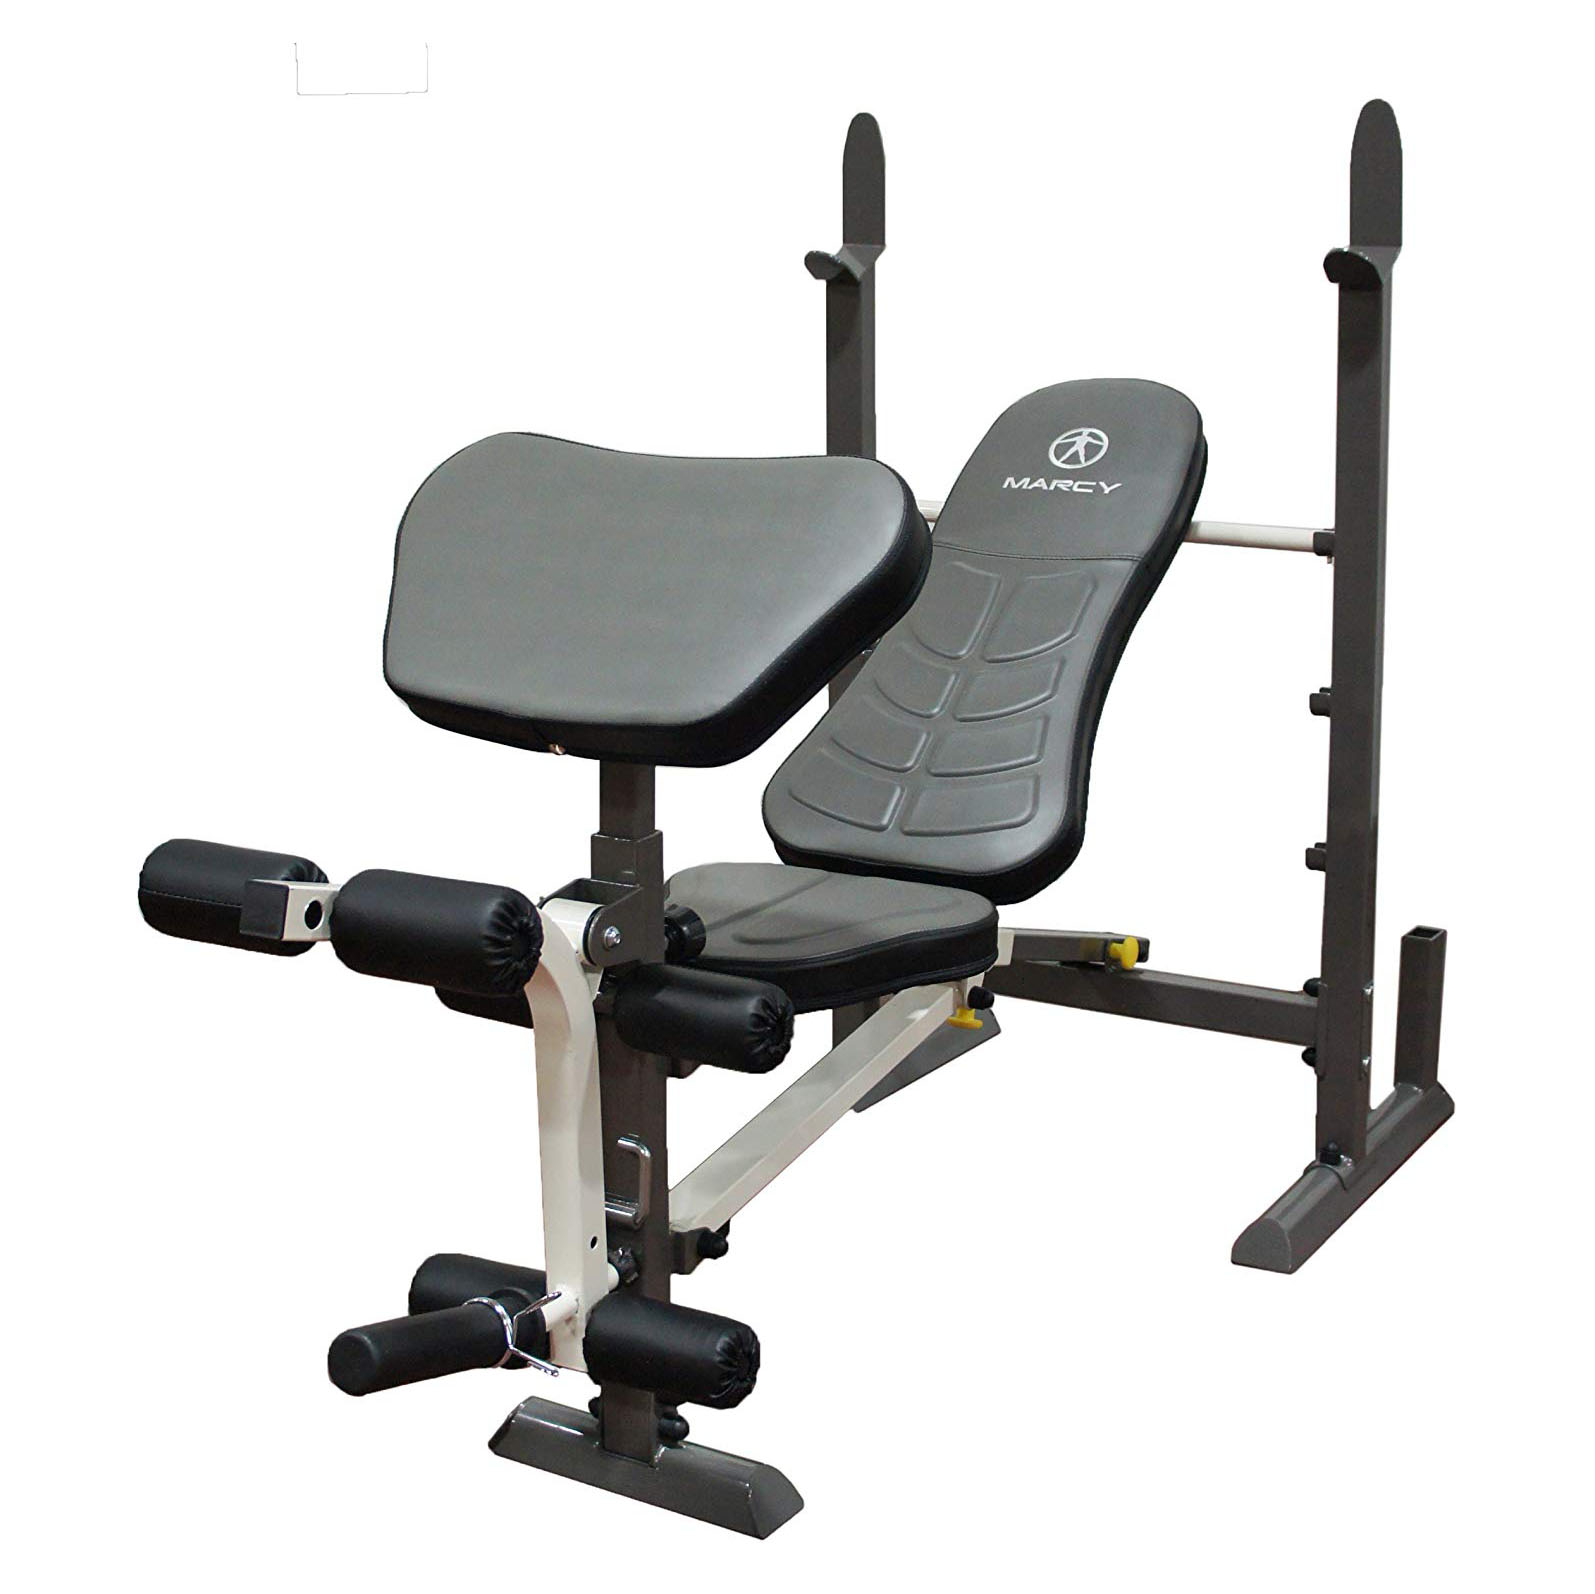 Marcy Foldable Standard Weight Benches MWB-20100 - image 1 of 3